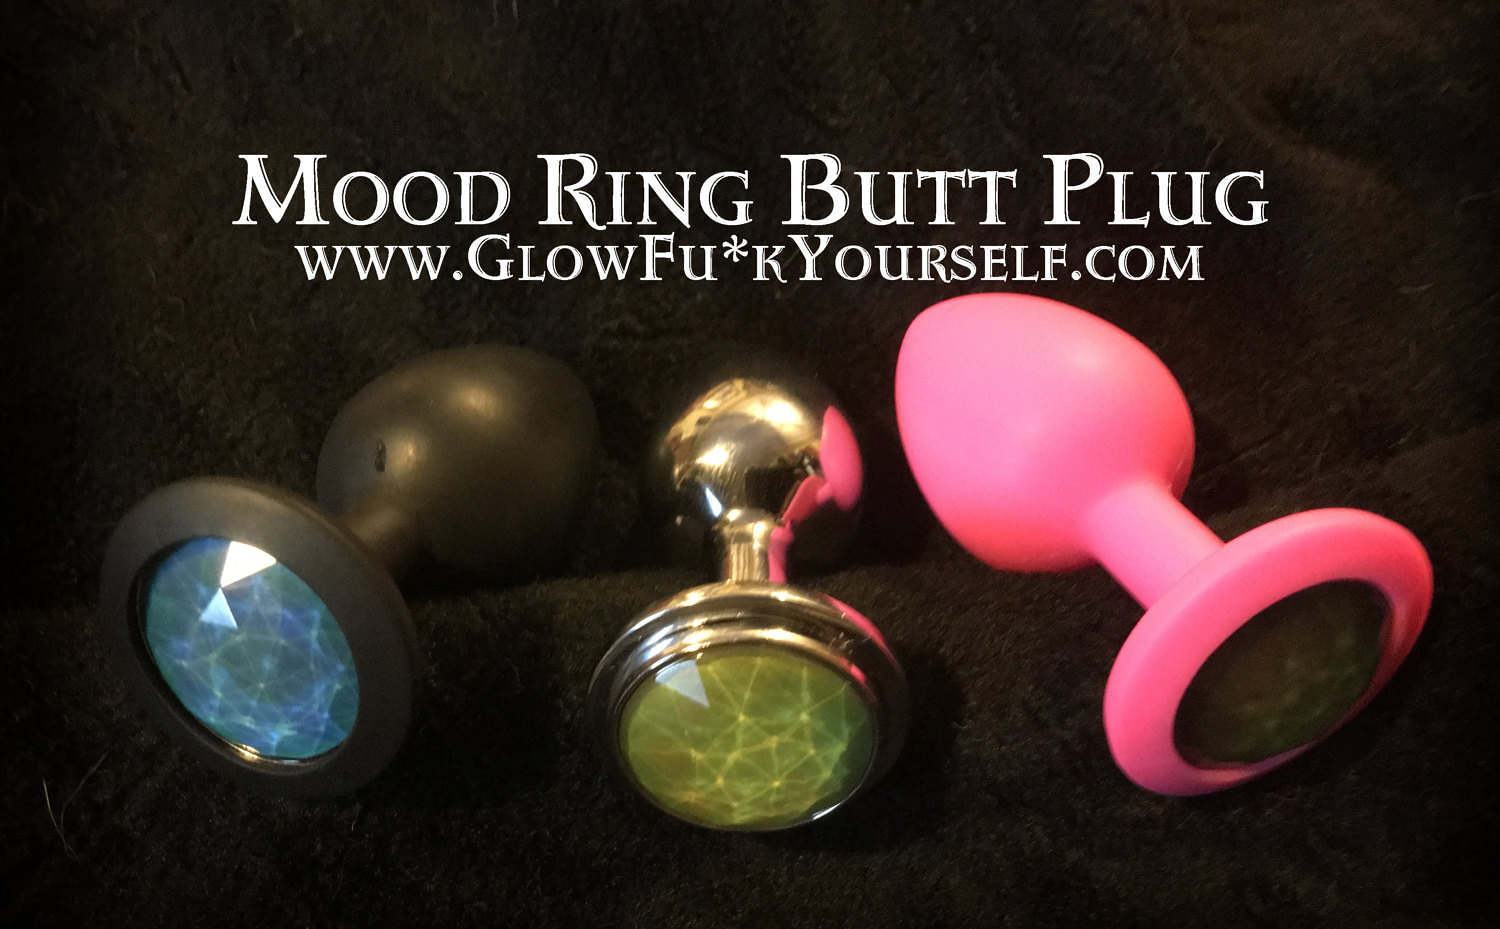 The Of Why Do People Use Butt Plugs? Your Guide To Anal Plugs